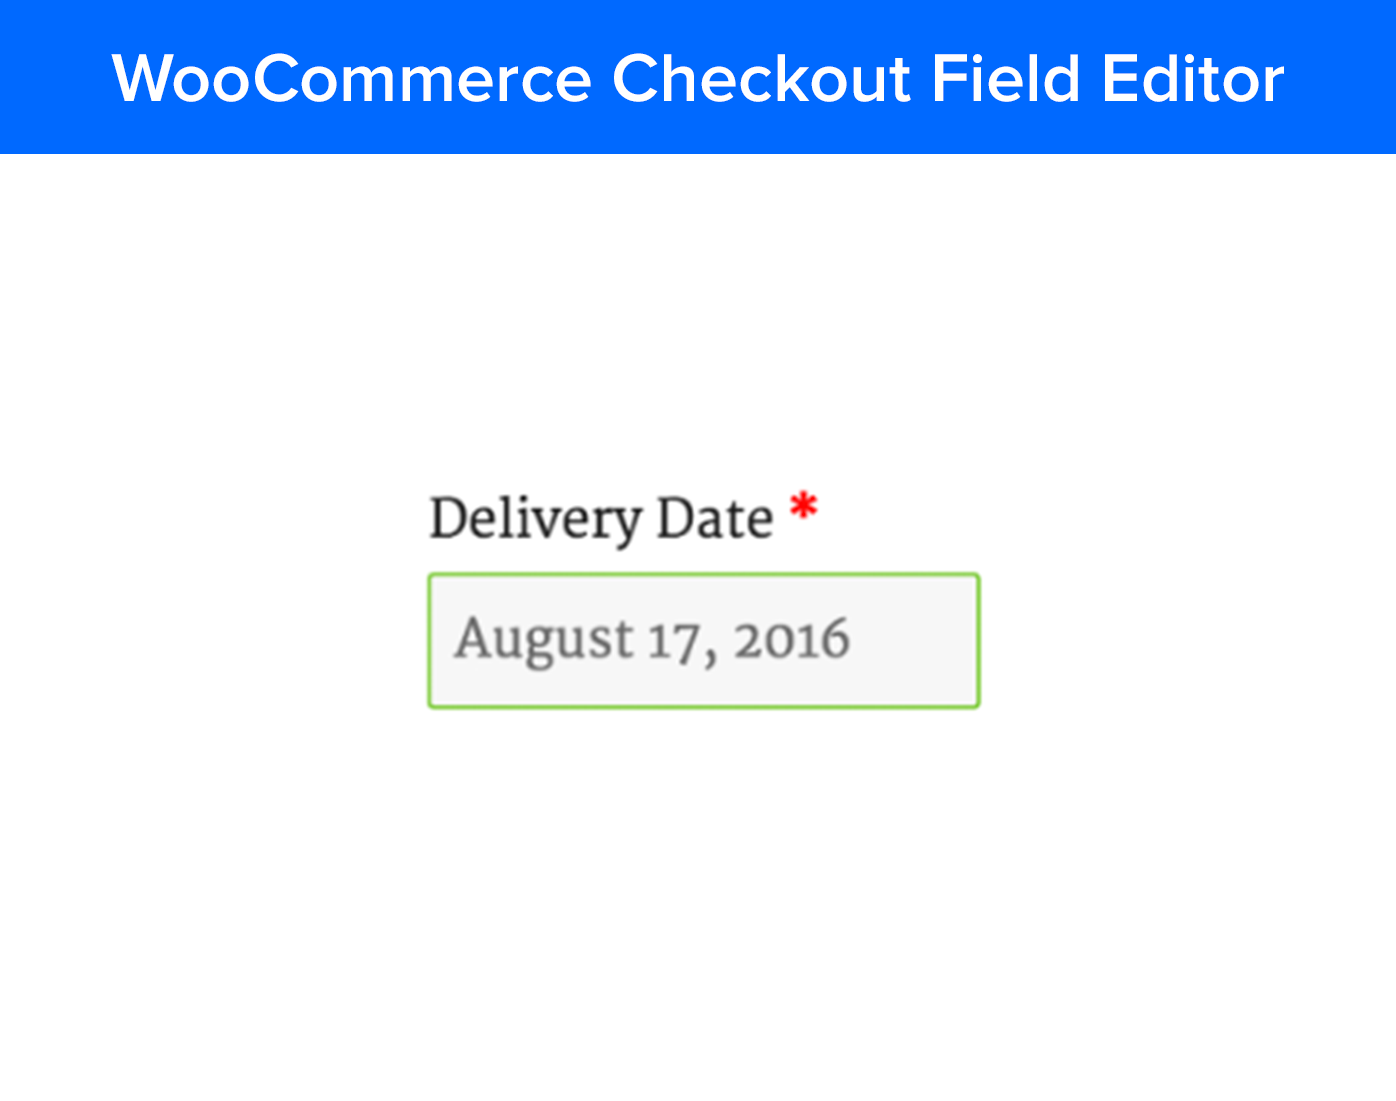 Optimize your checkout process by adding, removing or editing fields to suit your needs with WooCommerce Checkout Field Editor.